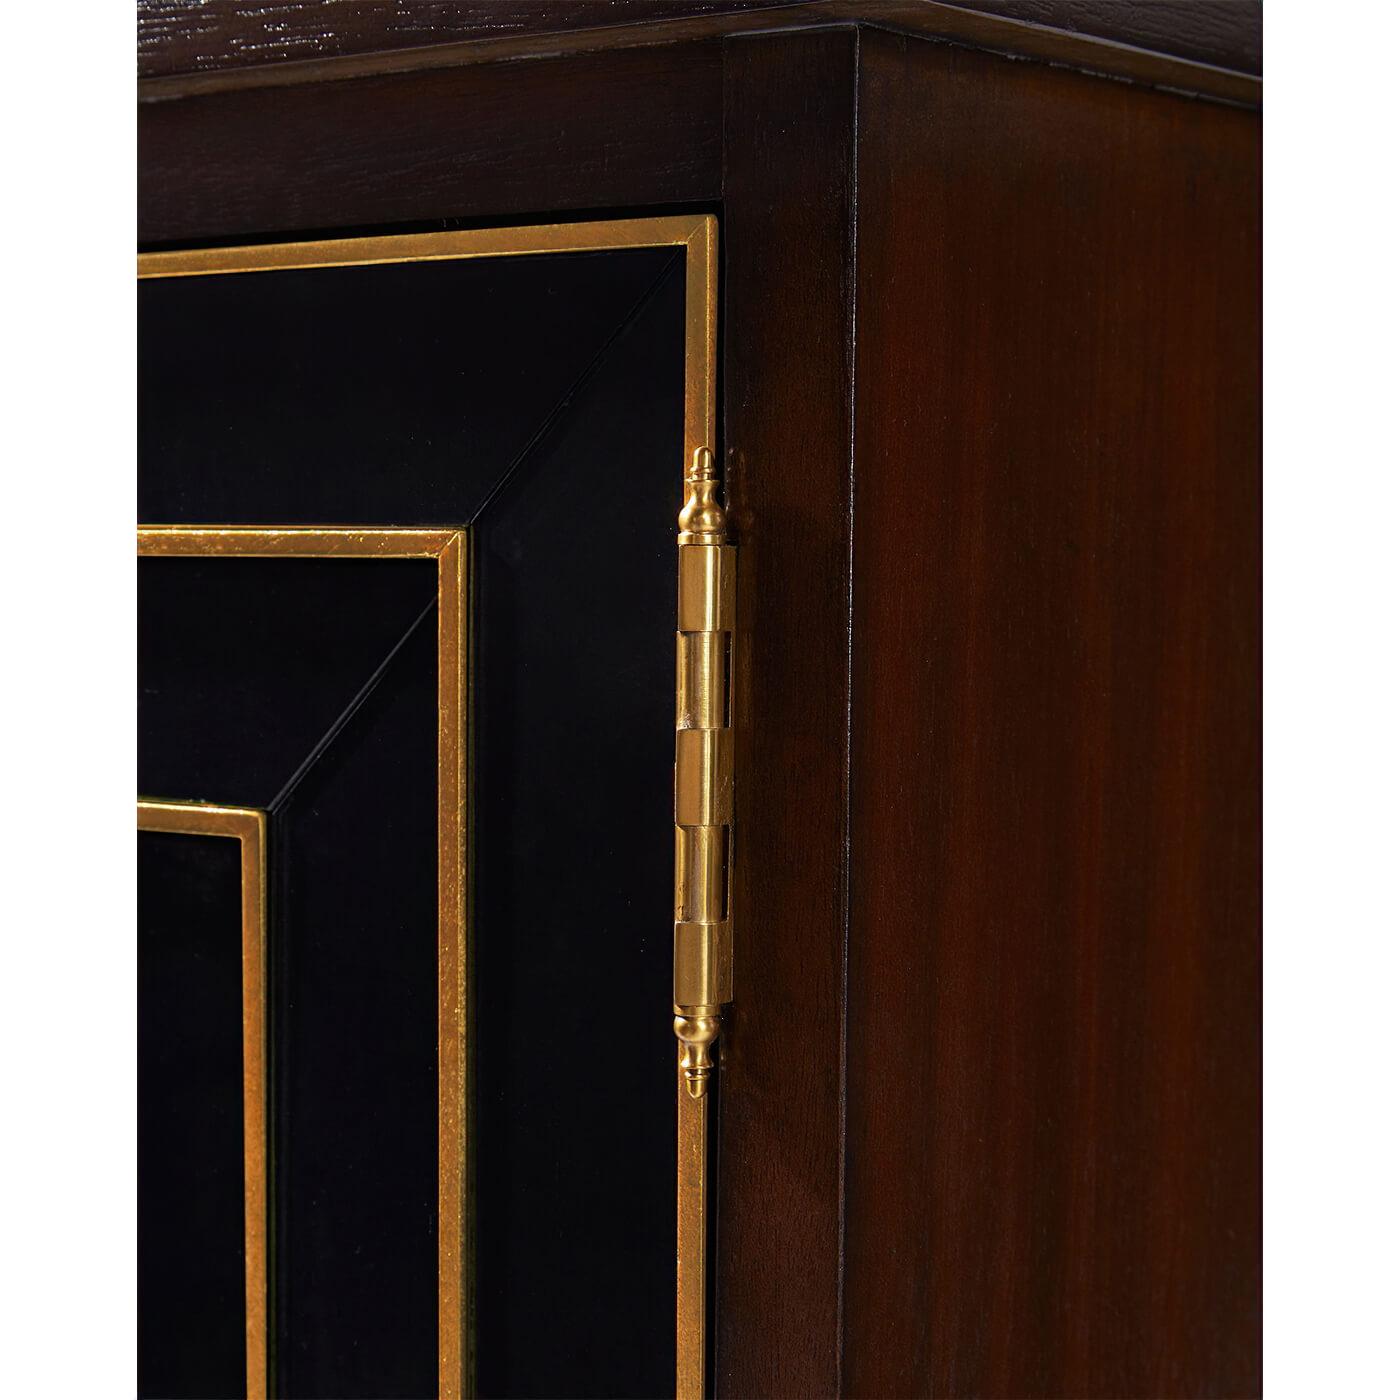 Contemporary French Art Deco Bar Cabinet For Sale